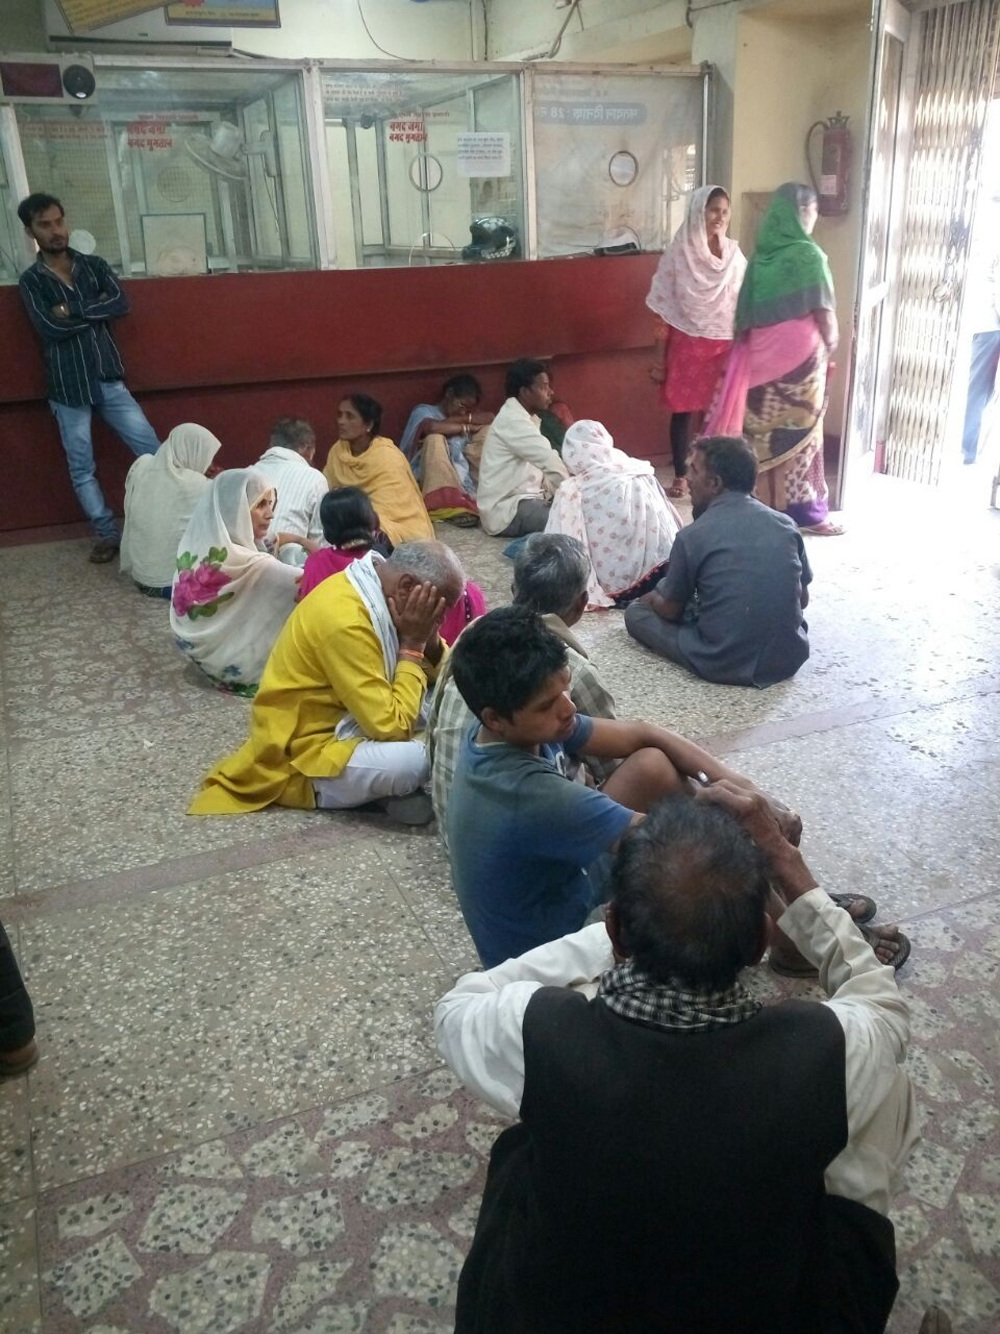 Regarding compulsion in front of bank counter to get out of their own